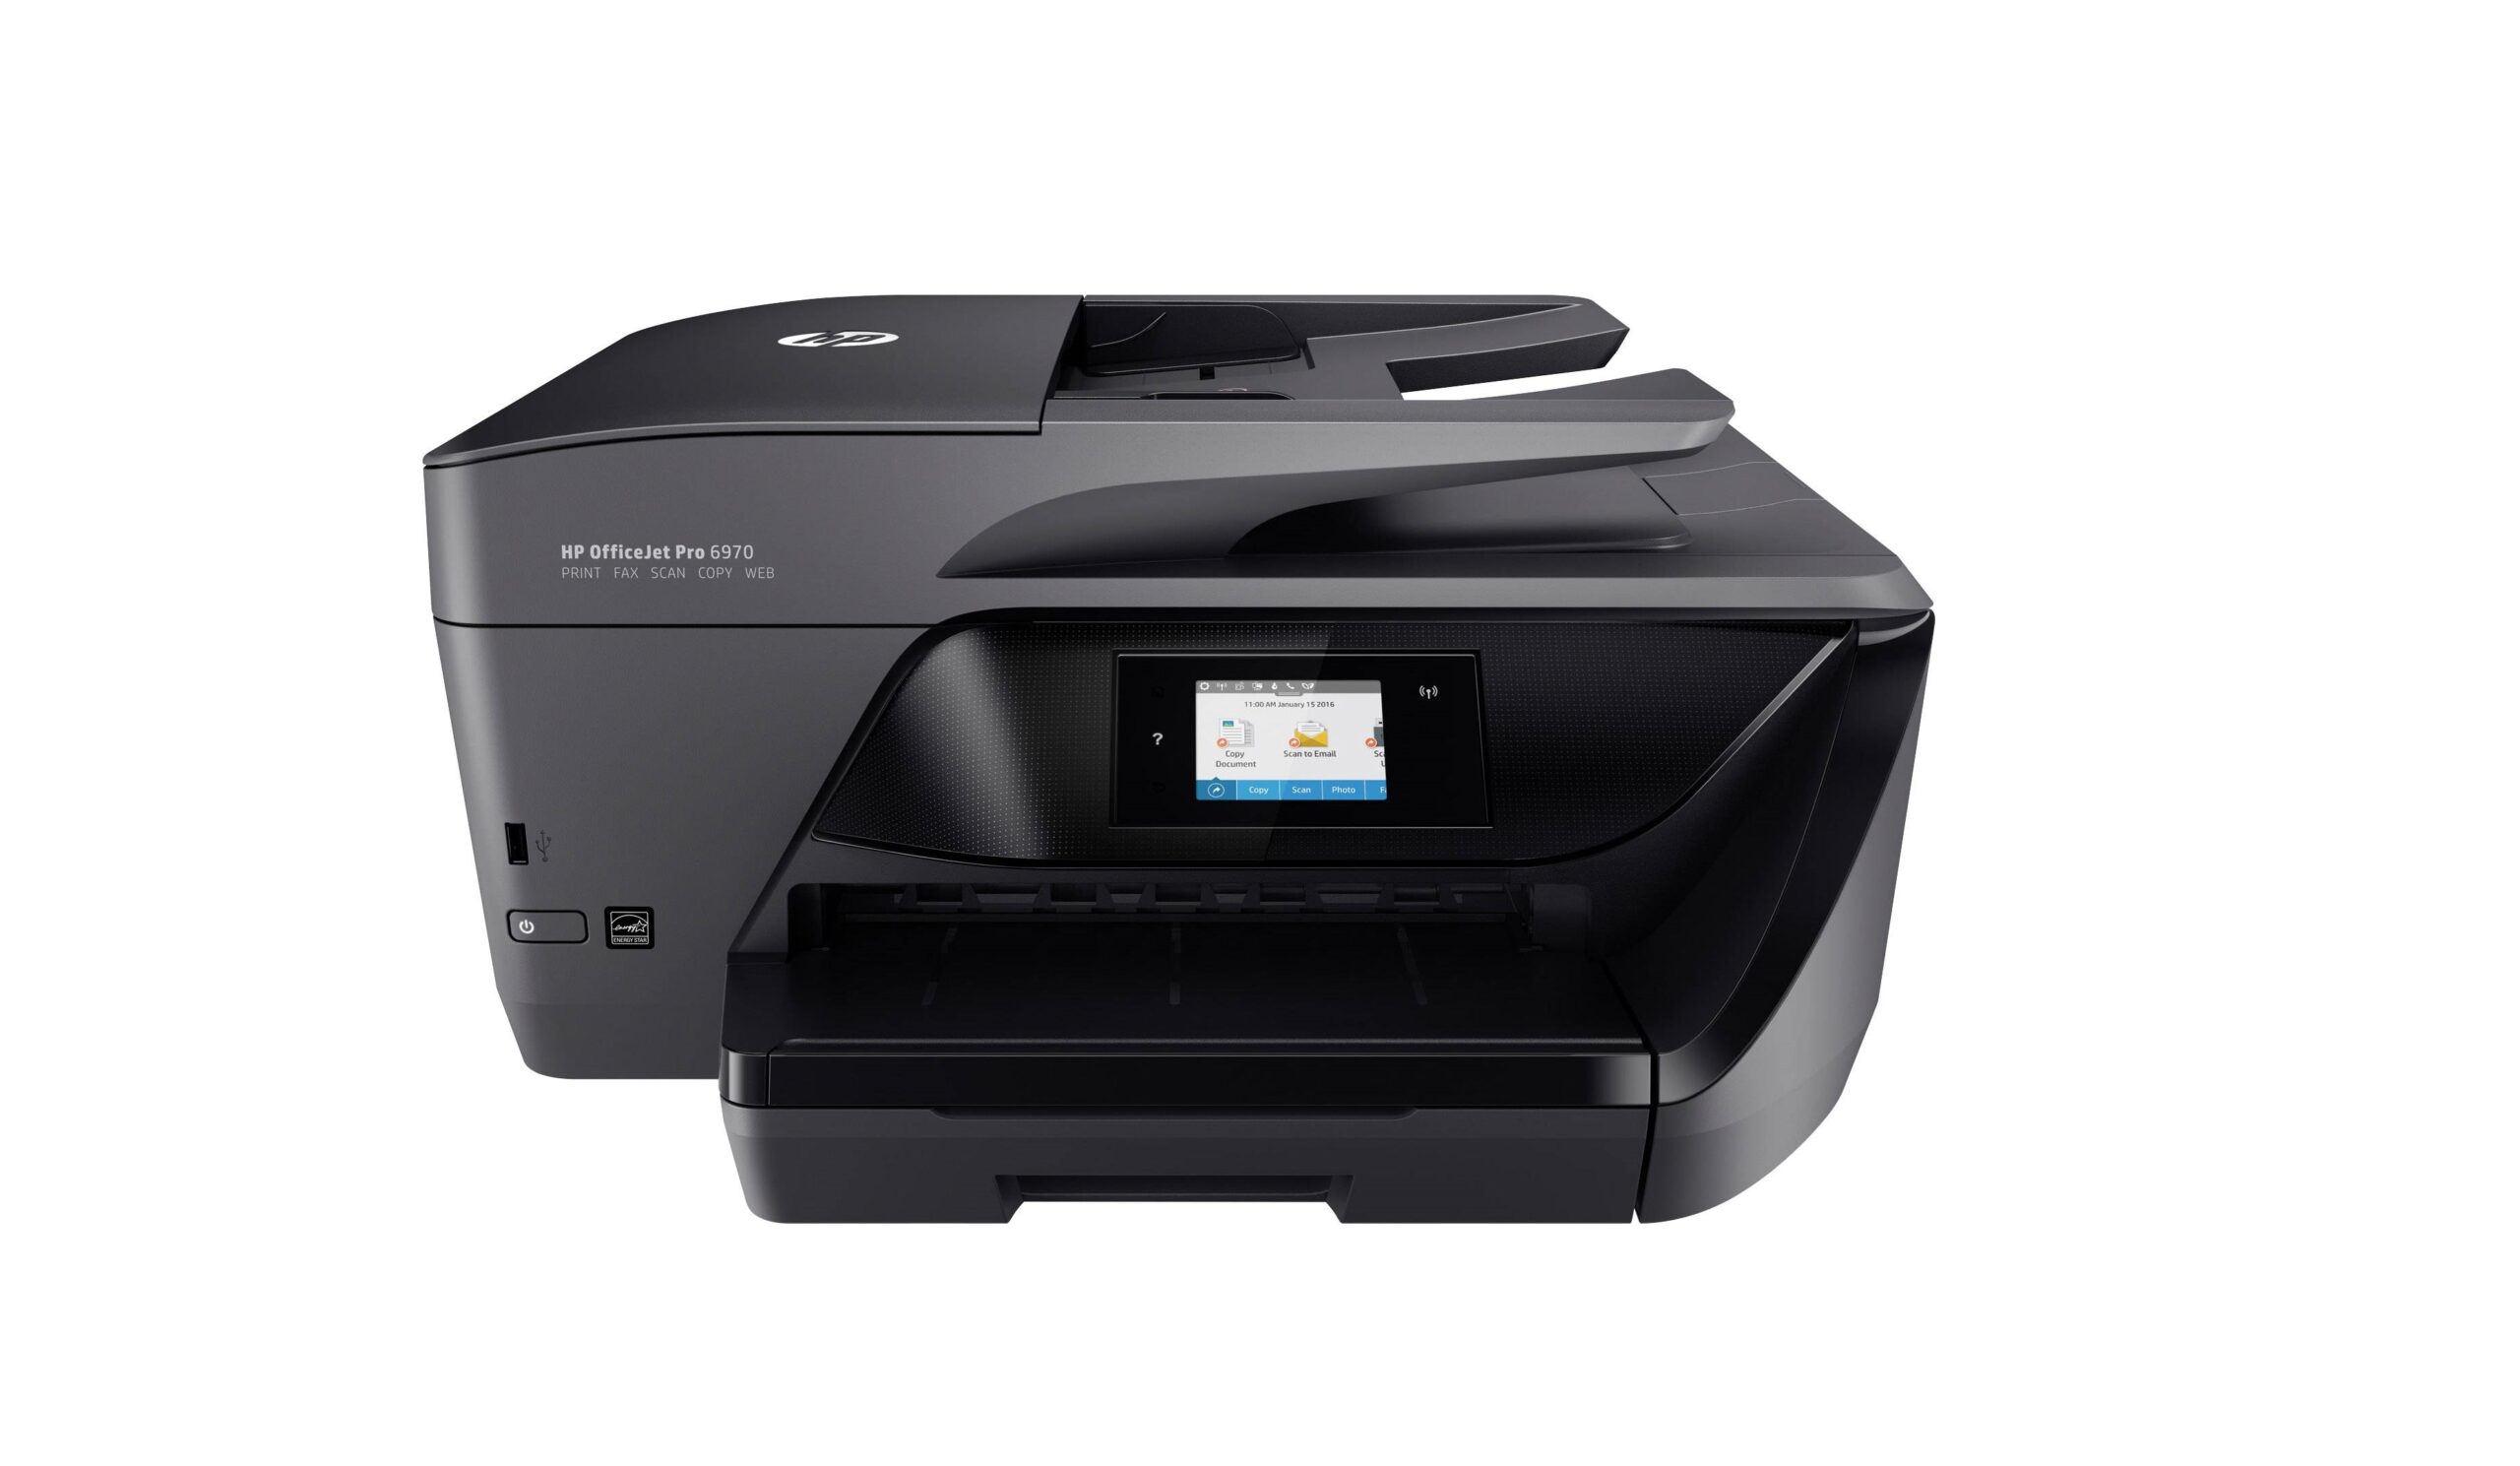 HP OfficeJet Pro 6970 All-in-One series featured